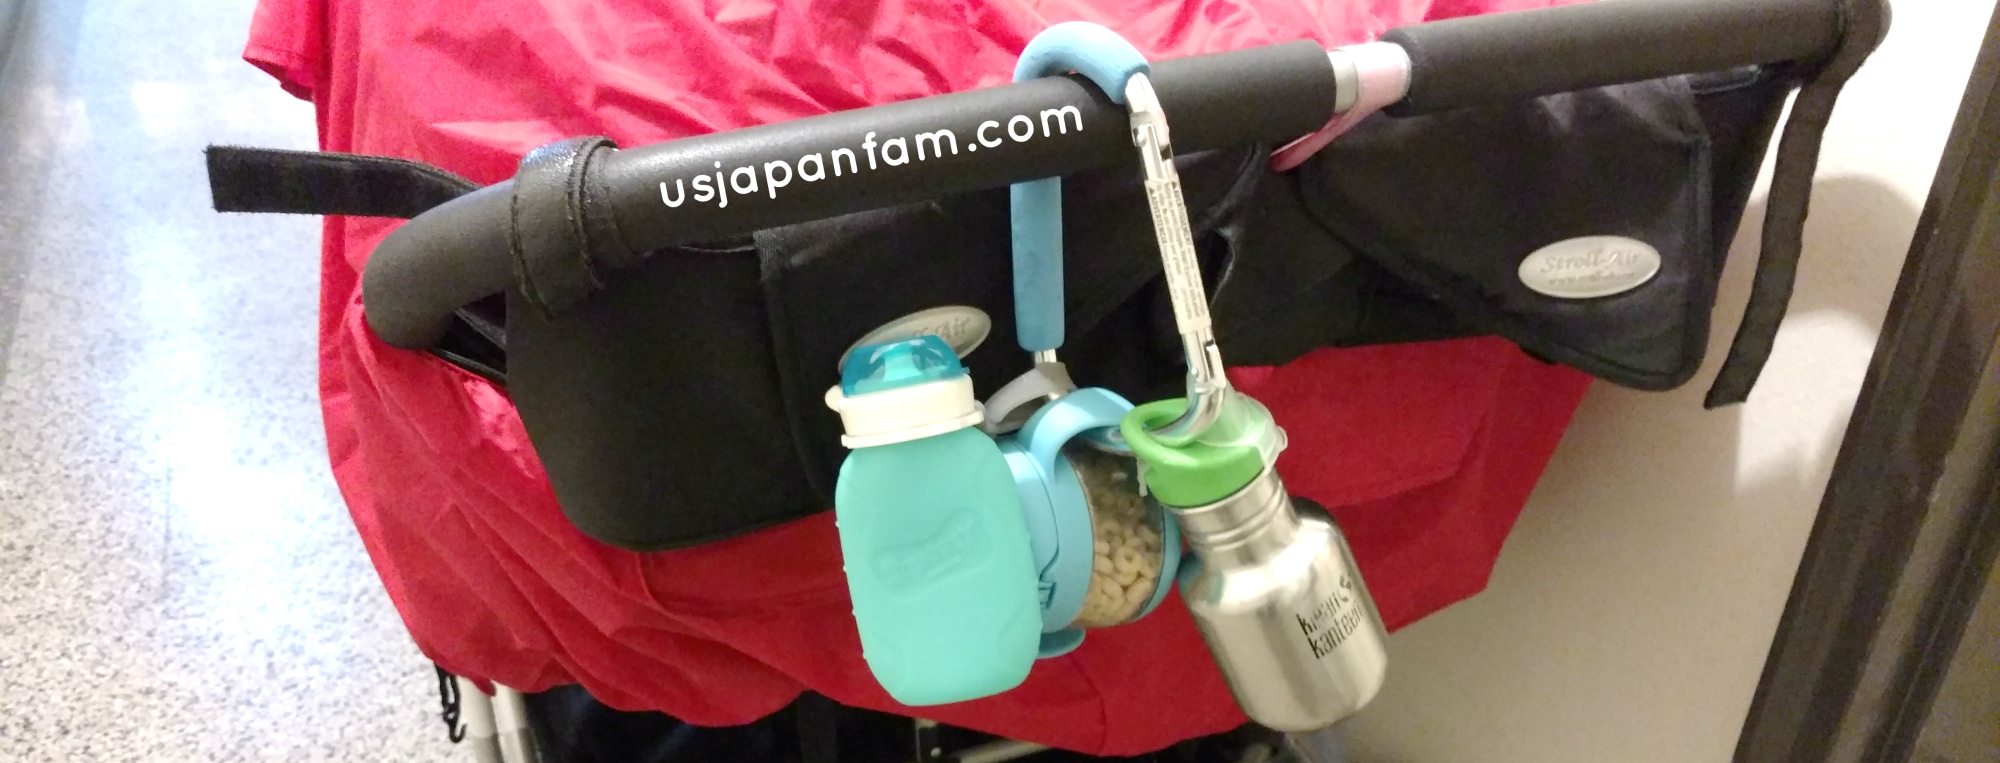 US Japan Fam's 13 Ways to Use The Mommy Hook: #2 - hang water bottles, snack cups, etc.